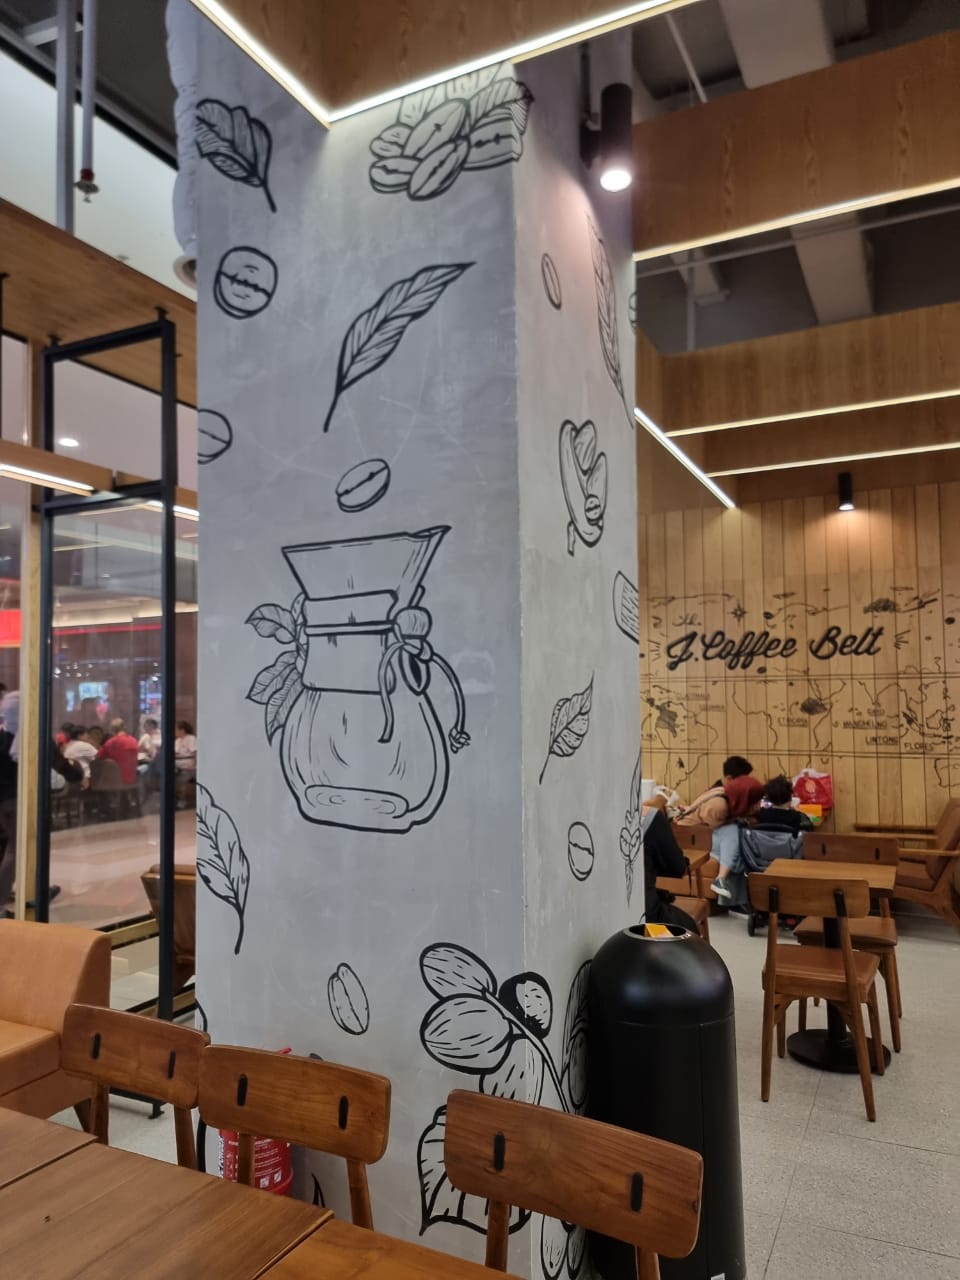 Affordable Custom Made Hand-painted Colourful Modern Coffee Shop Mural Wall Art In Malaysia Office/ Home @ ArtisanMalaysia.com